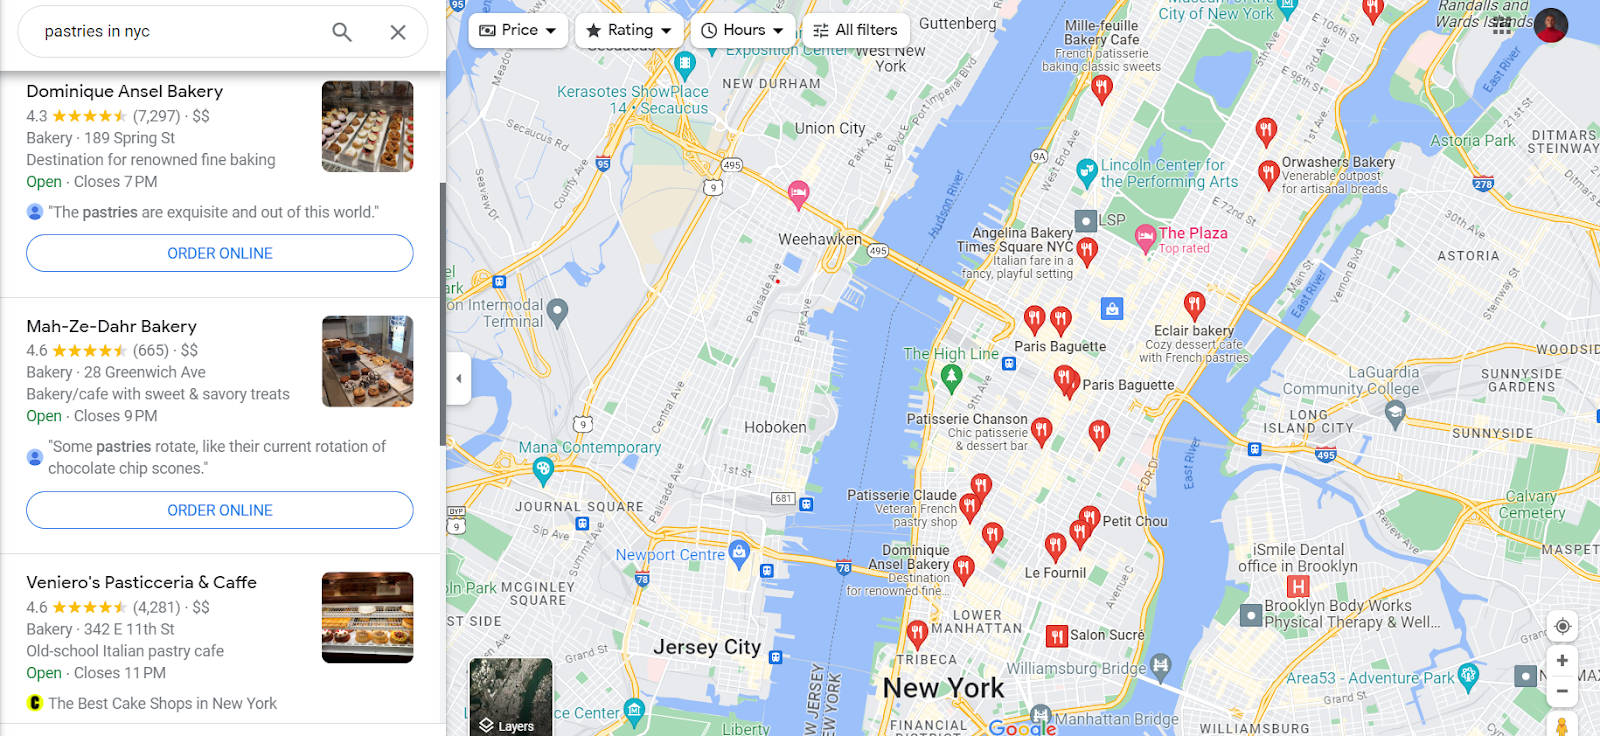 Google's result for pastries in nyc search